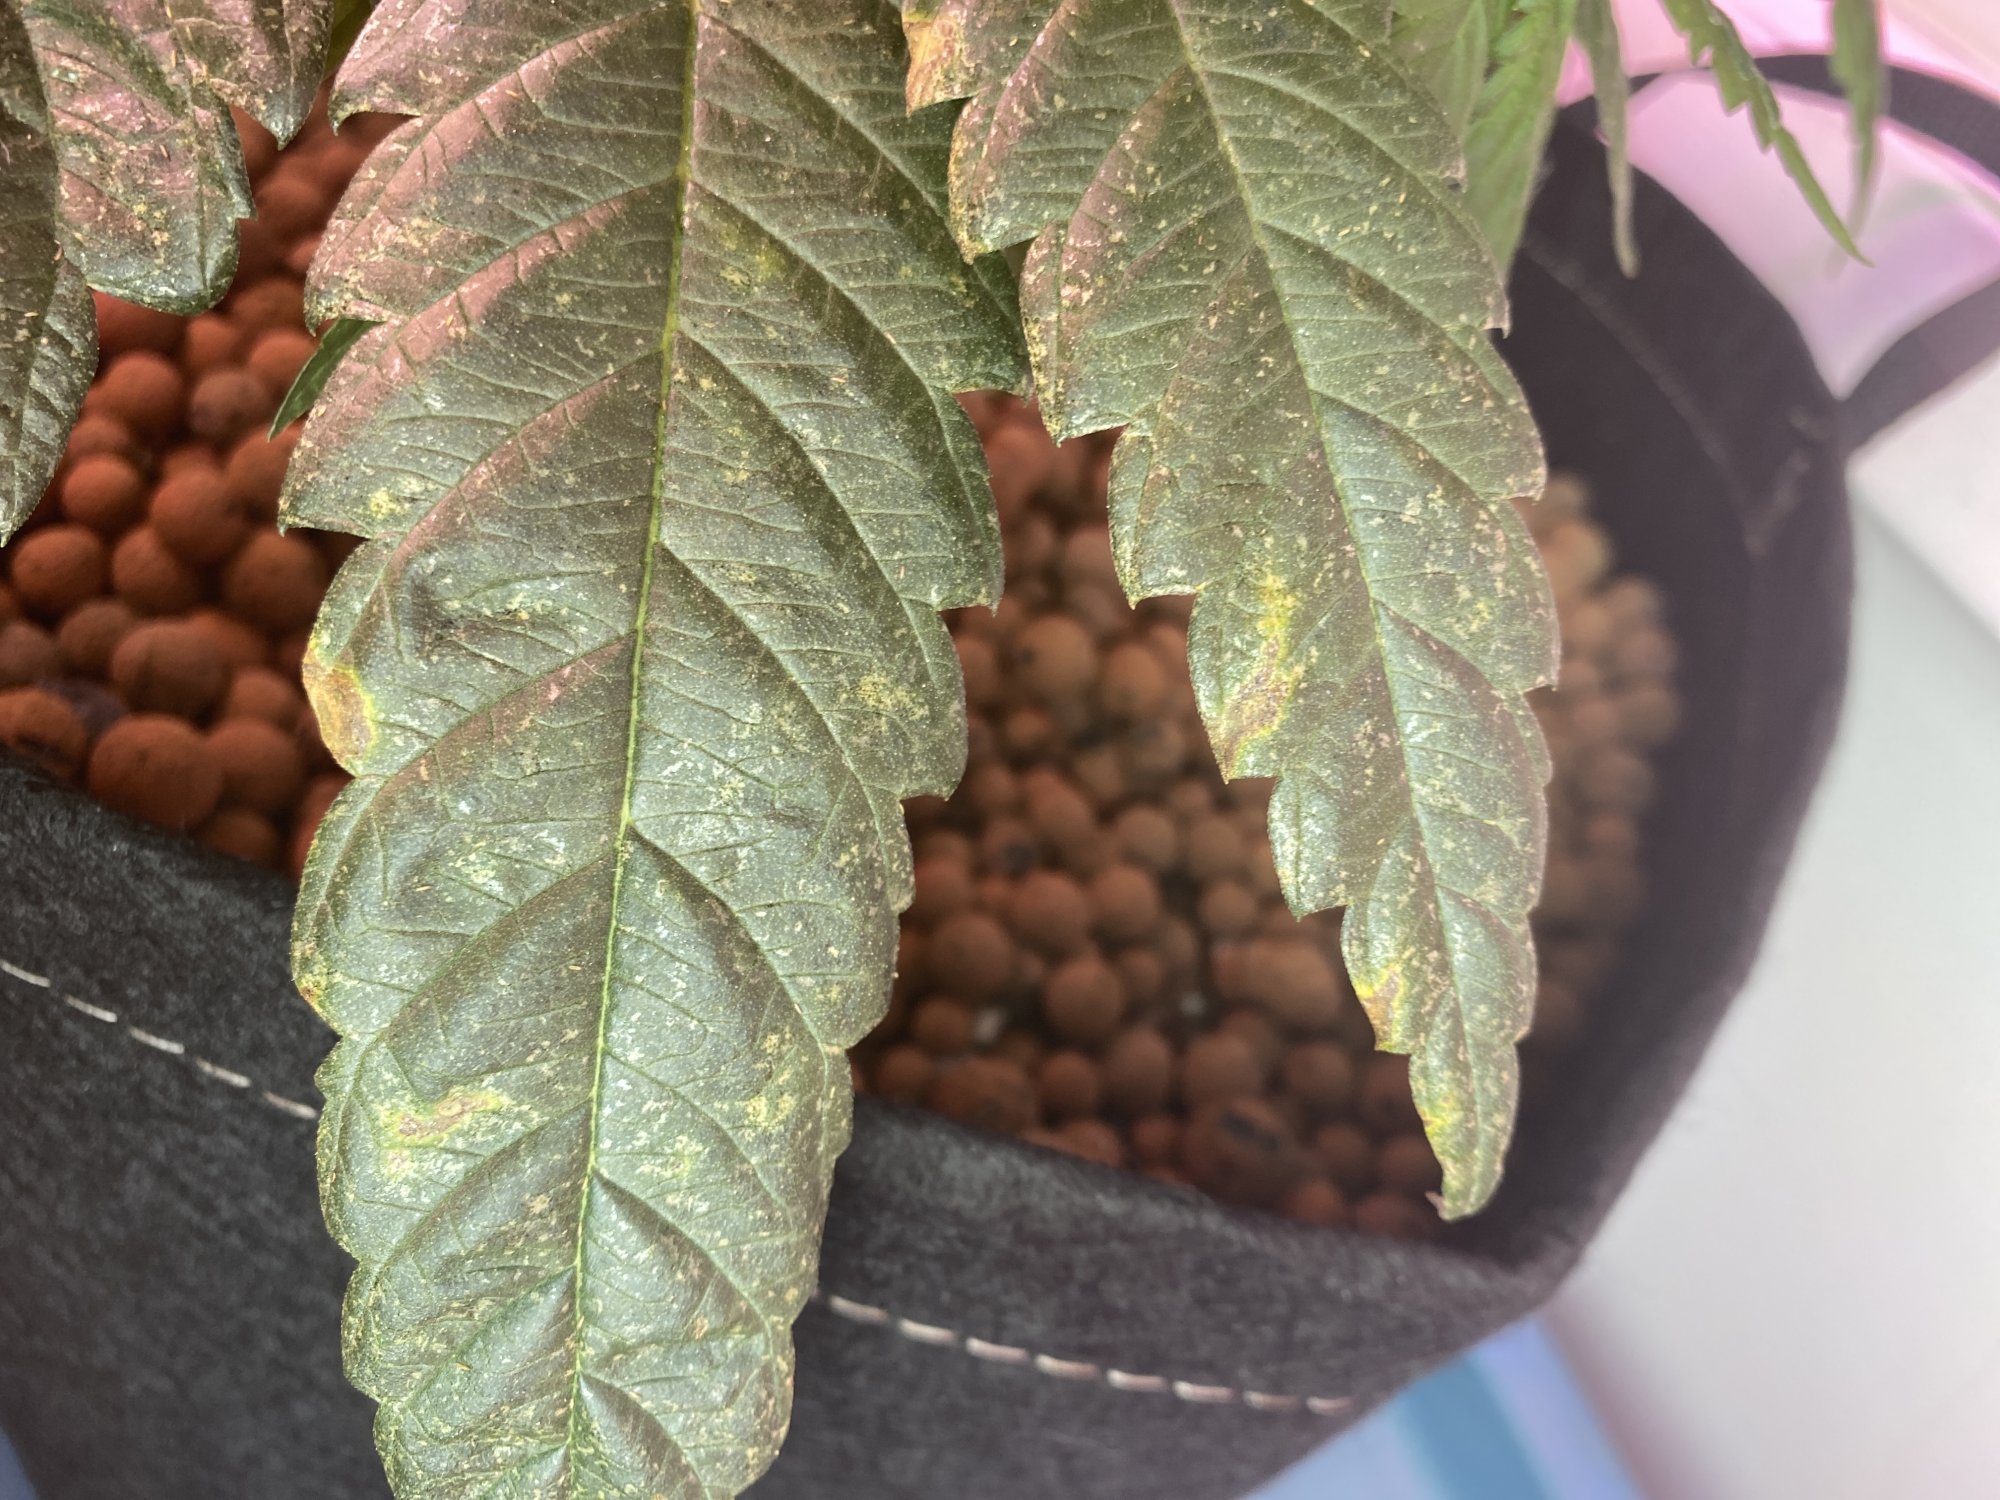 Possible deficiency but from what only on lower fan leaves 2